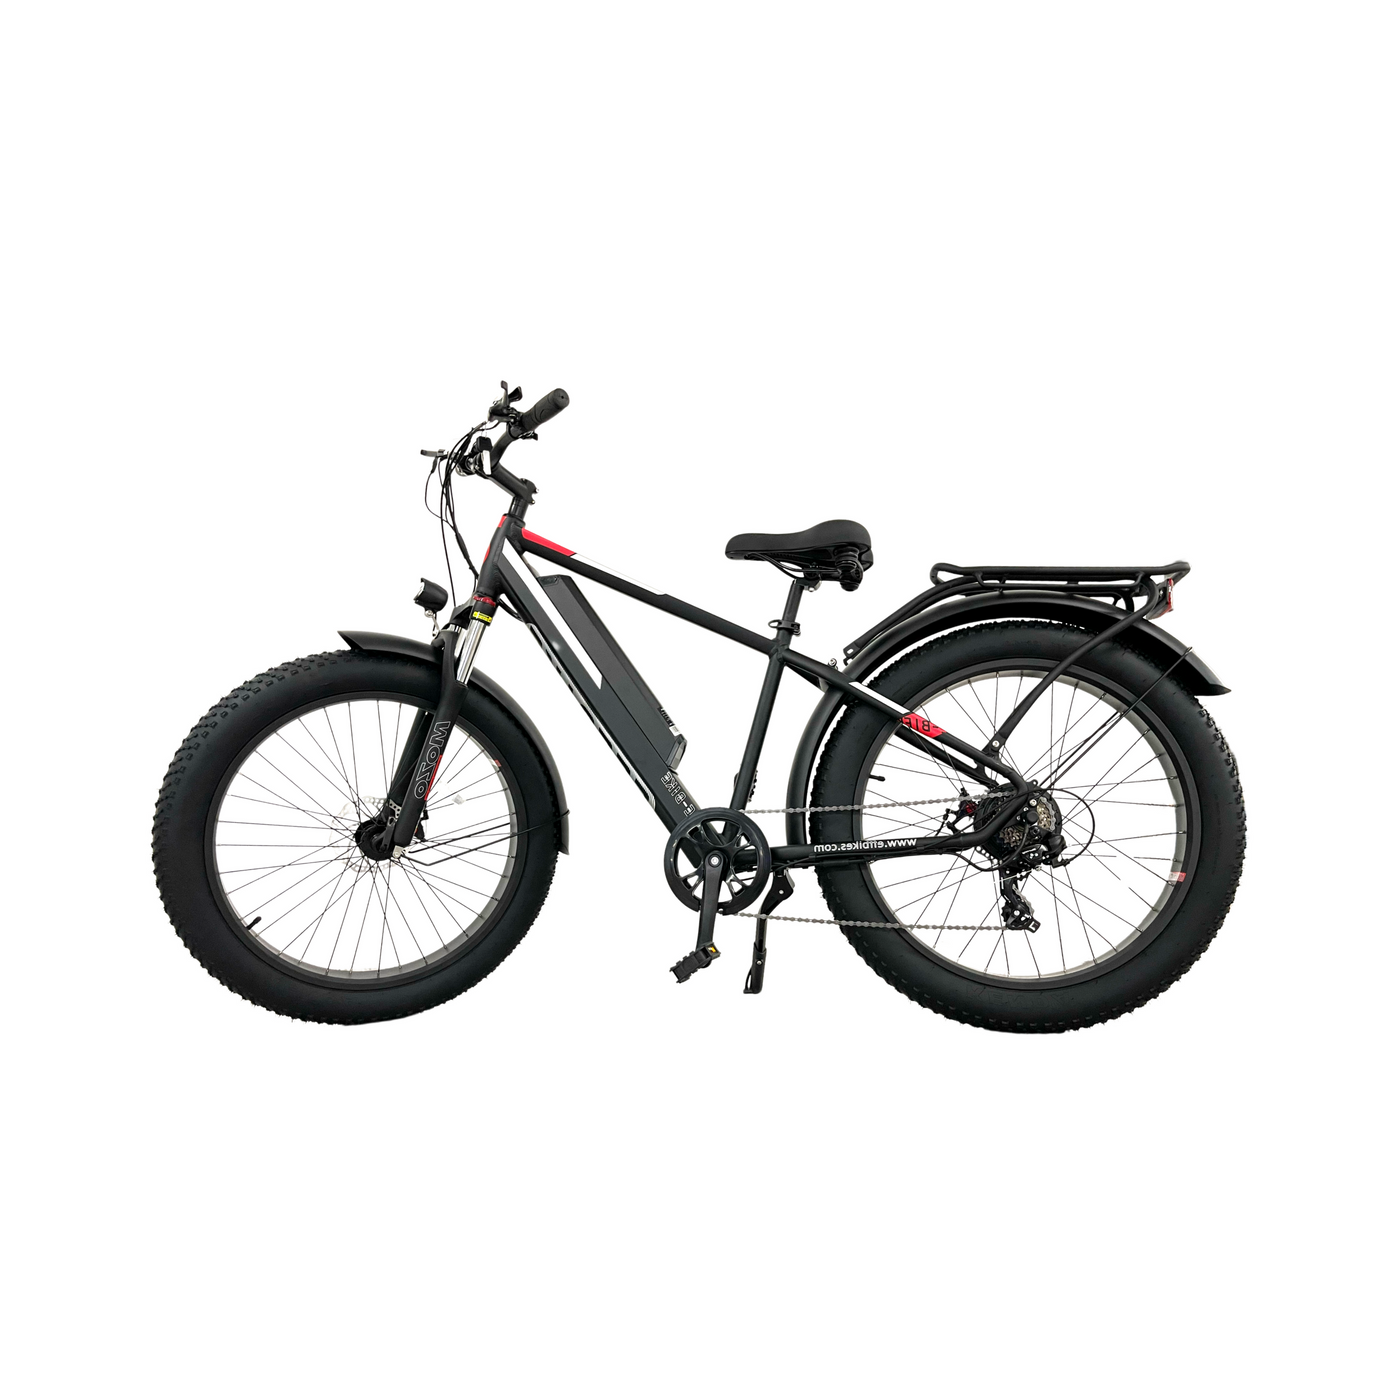 EFF BIKE Fat tire 6126- 21% Off with Free Shipping